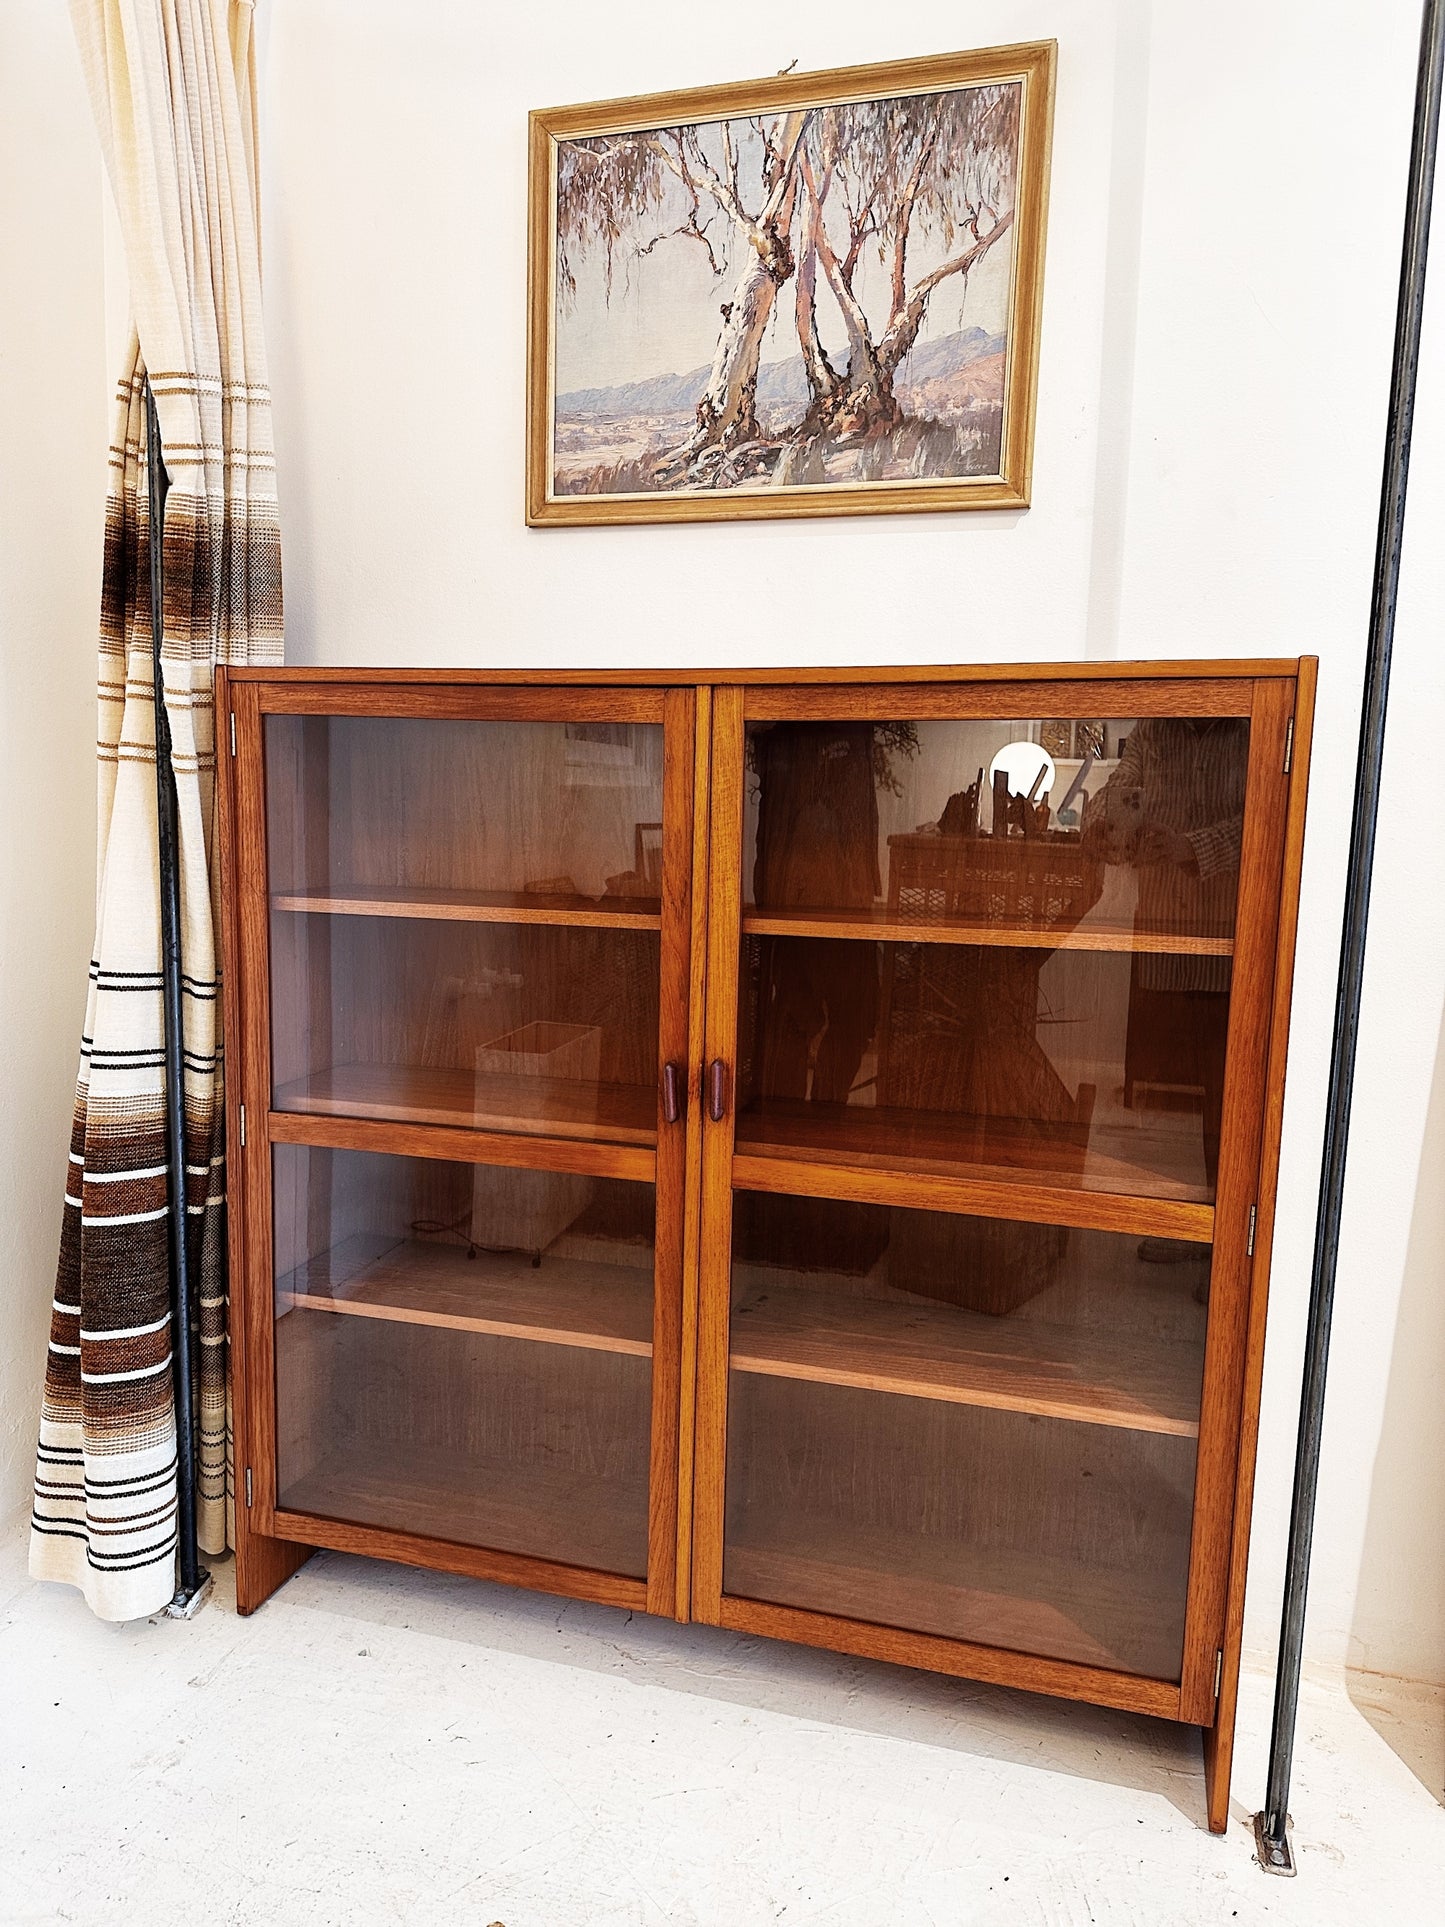 Vintage Parker Bookcase / Cabinet with Glass Doors